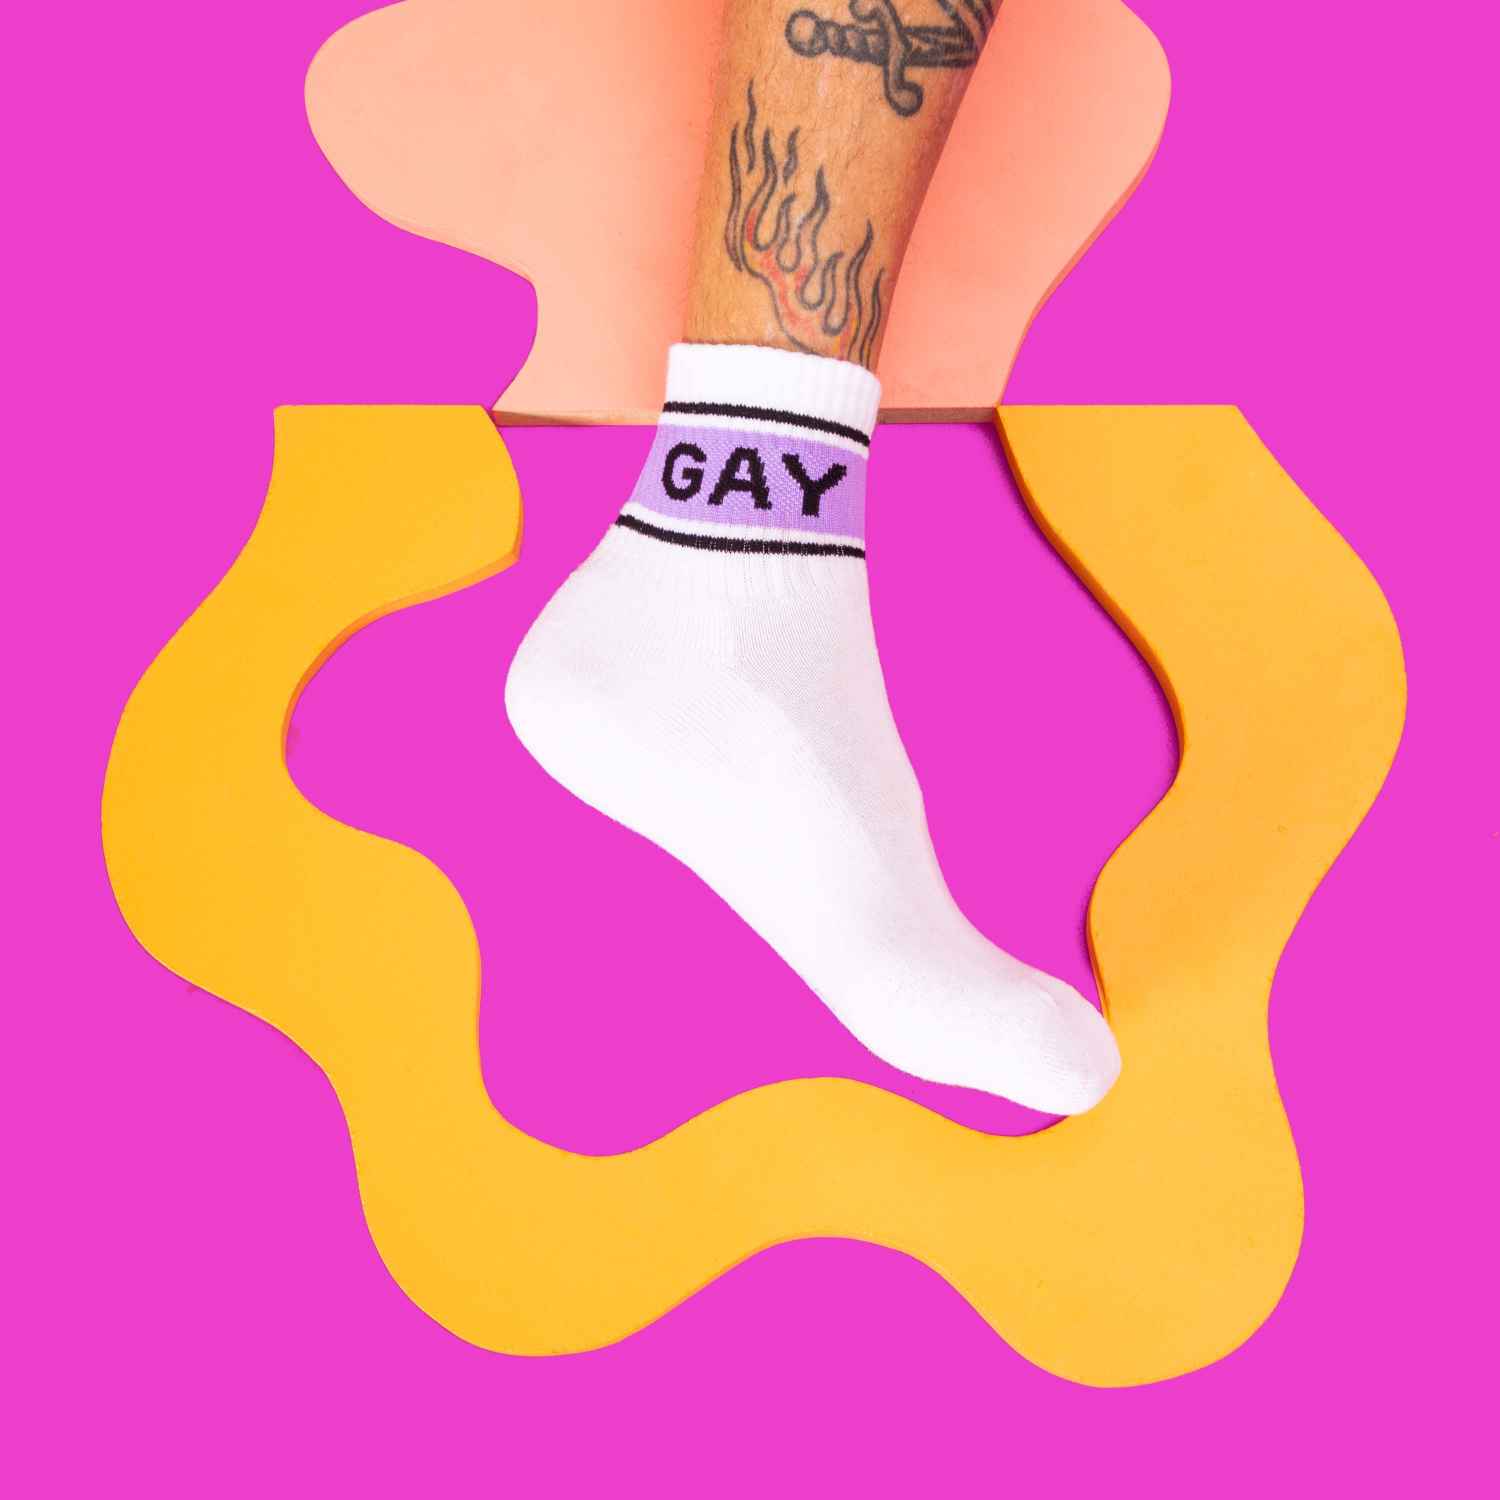 A white and purple quarter-crew sock against a vibrant pink and yellow that read "Gay" with the Gumball Poodle logo along the arch.